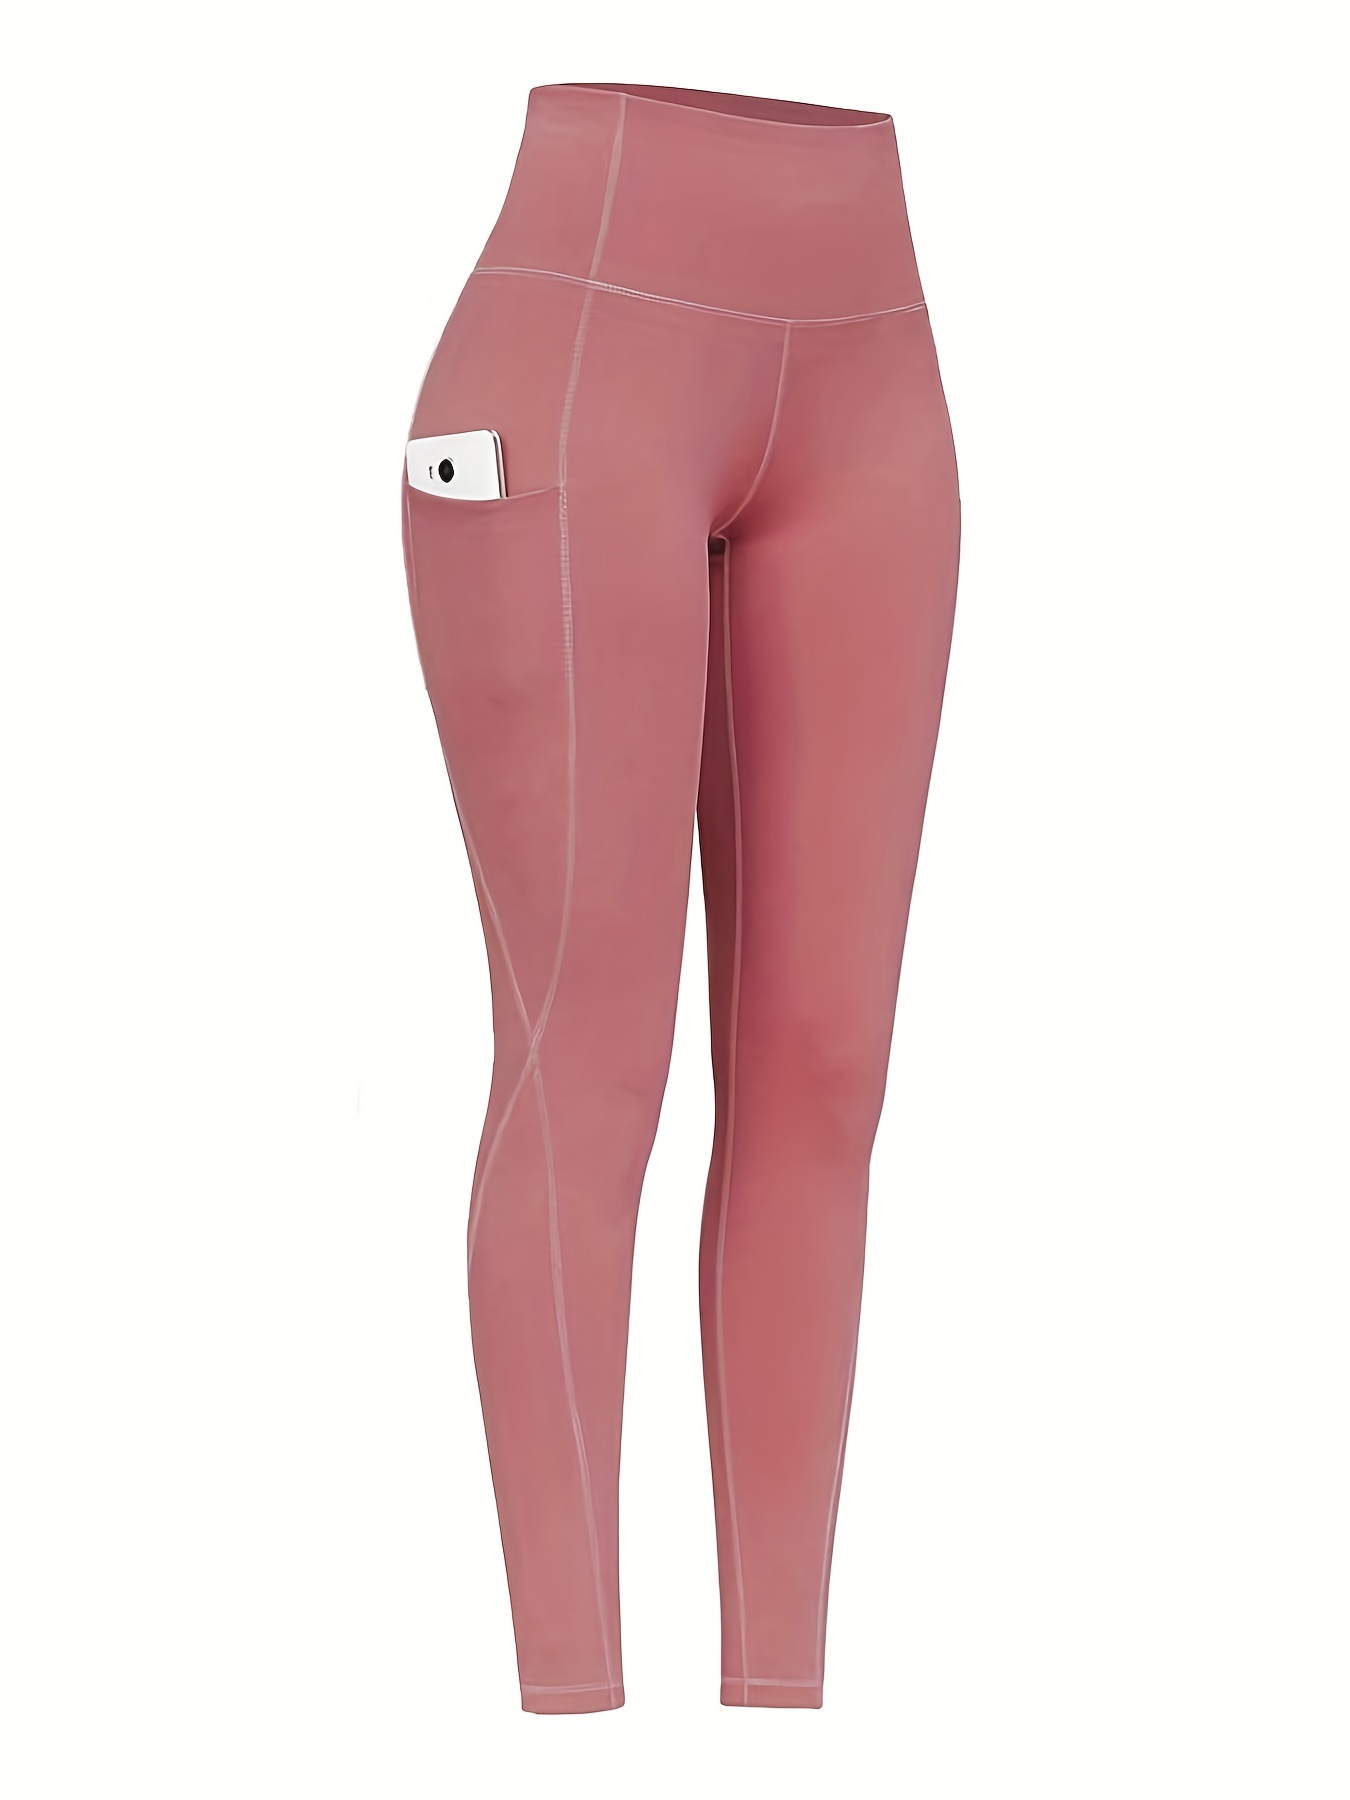 YYDGH Women's Yoga Pants Tummy Control High Waist Workout Leggings with 2  Pocket Pink 4XL